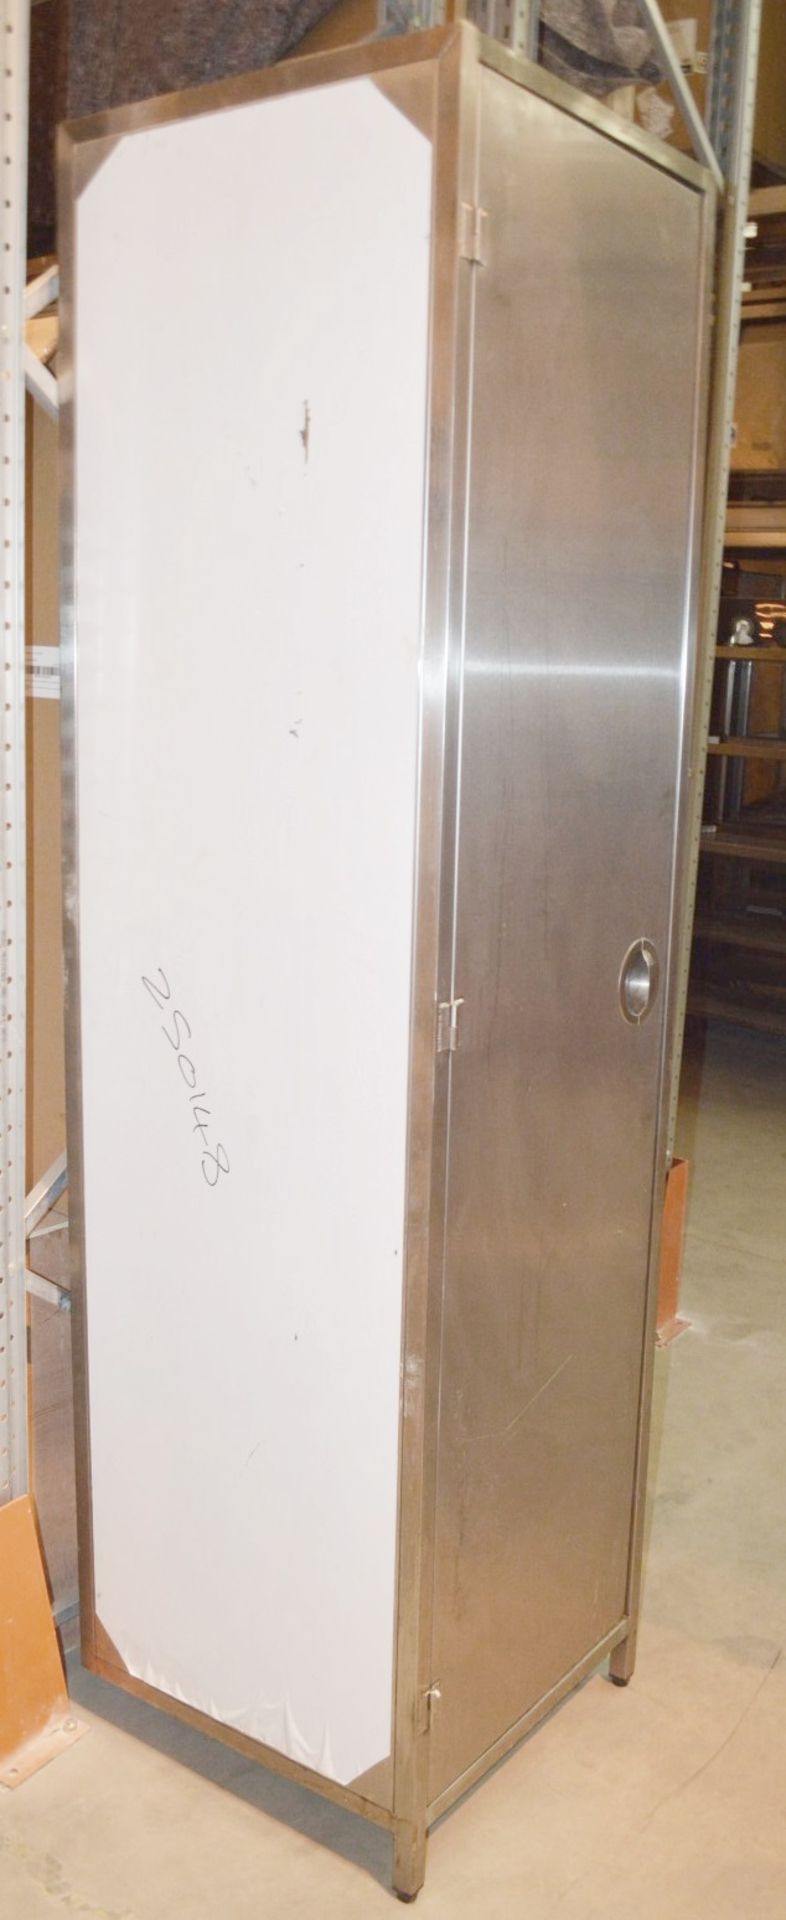 1 x Stainless Steel Commercial Kitchen  Wall-mounted Utility Cupboard - Dimensions: H220xW60xD60cm - Image 4 of 5